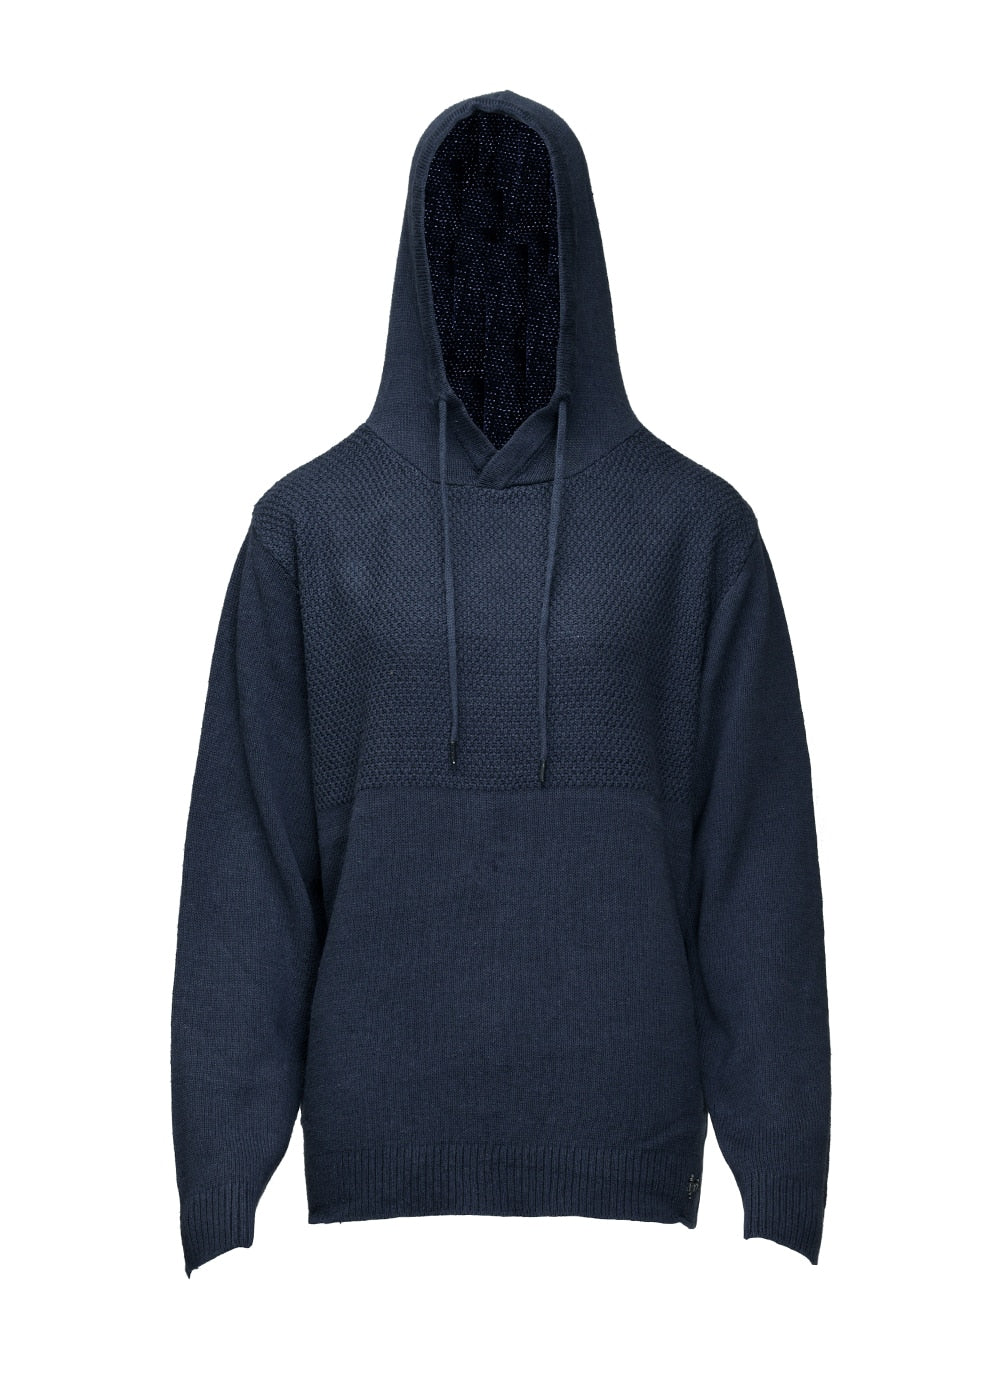 Nomads Hemp wear wrangler sweater, mens jumper with hoodie, made from hemp and organic cotton knit, found at tantrika australia